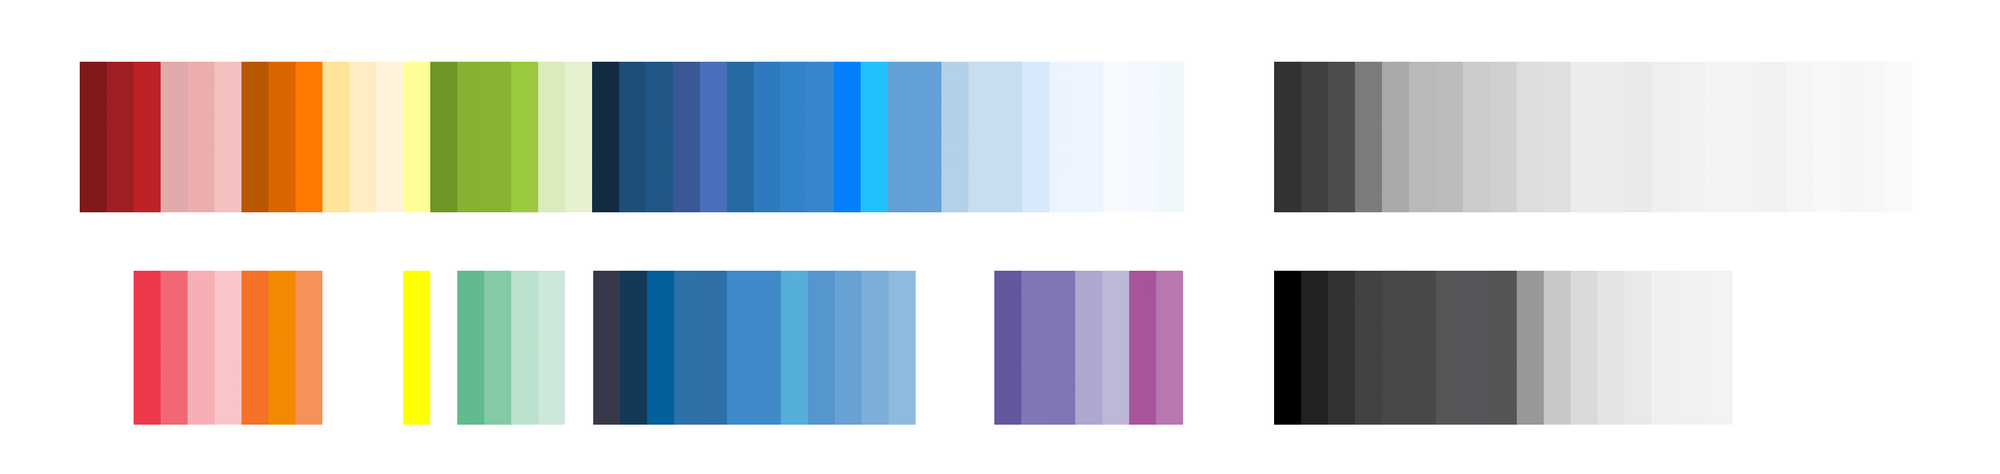 Above - our product palette. Below - our marketing palette aligned by hue